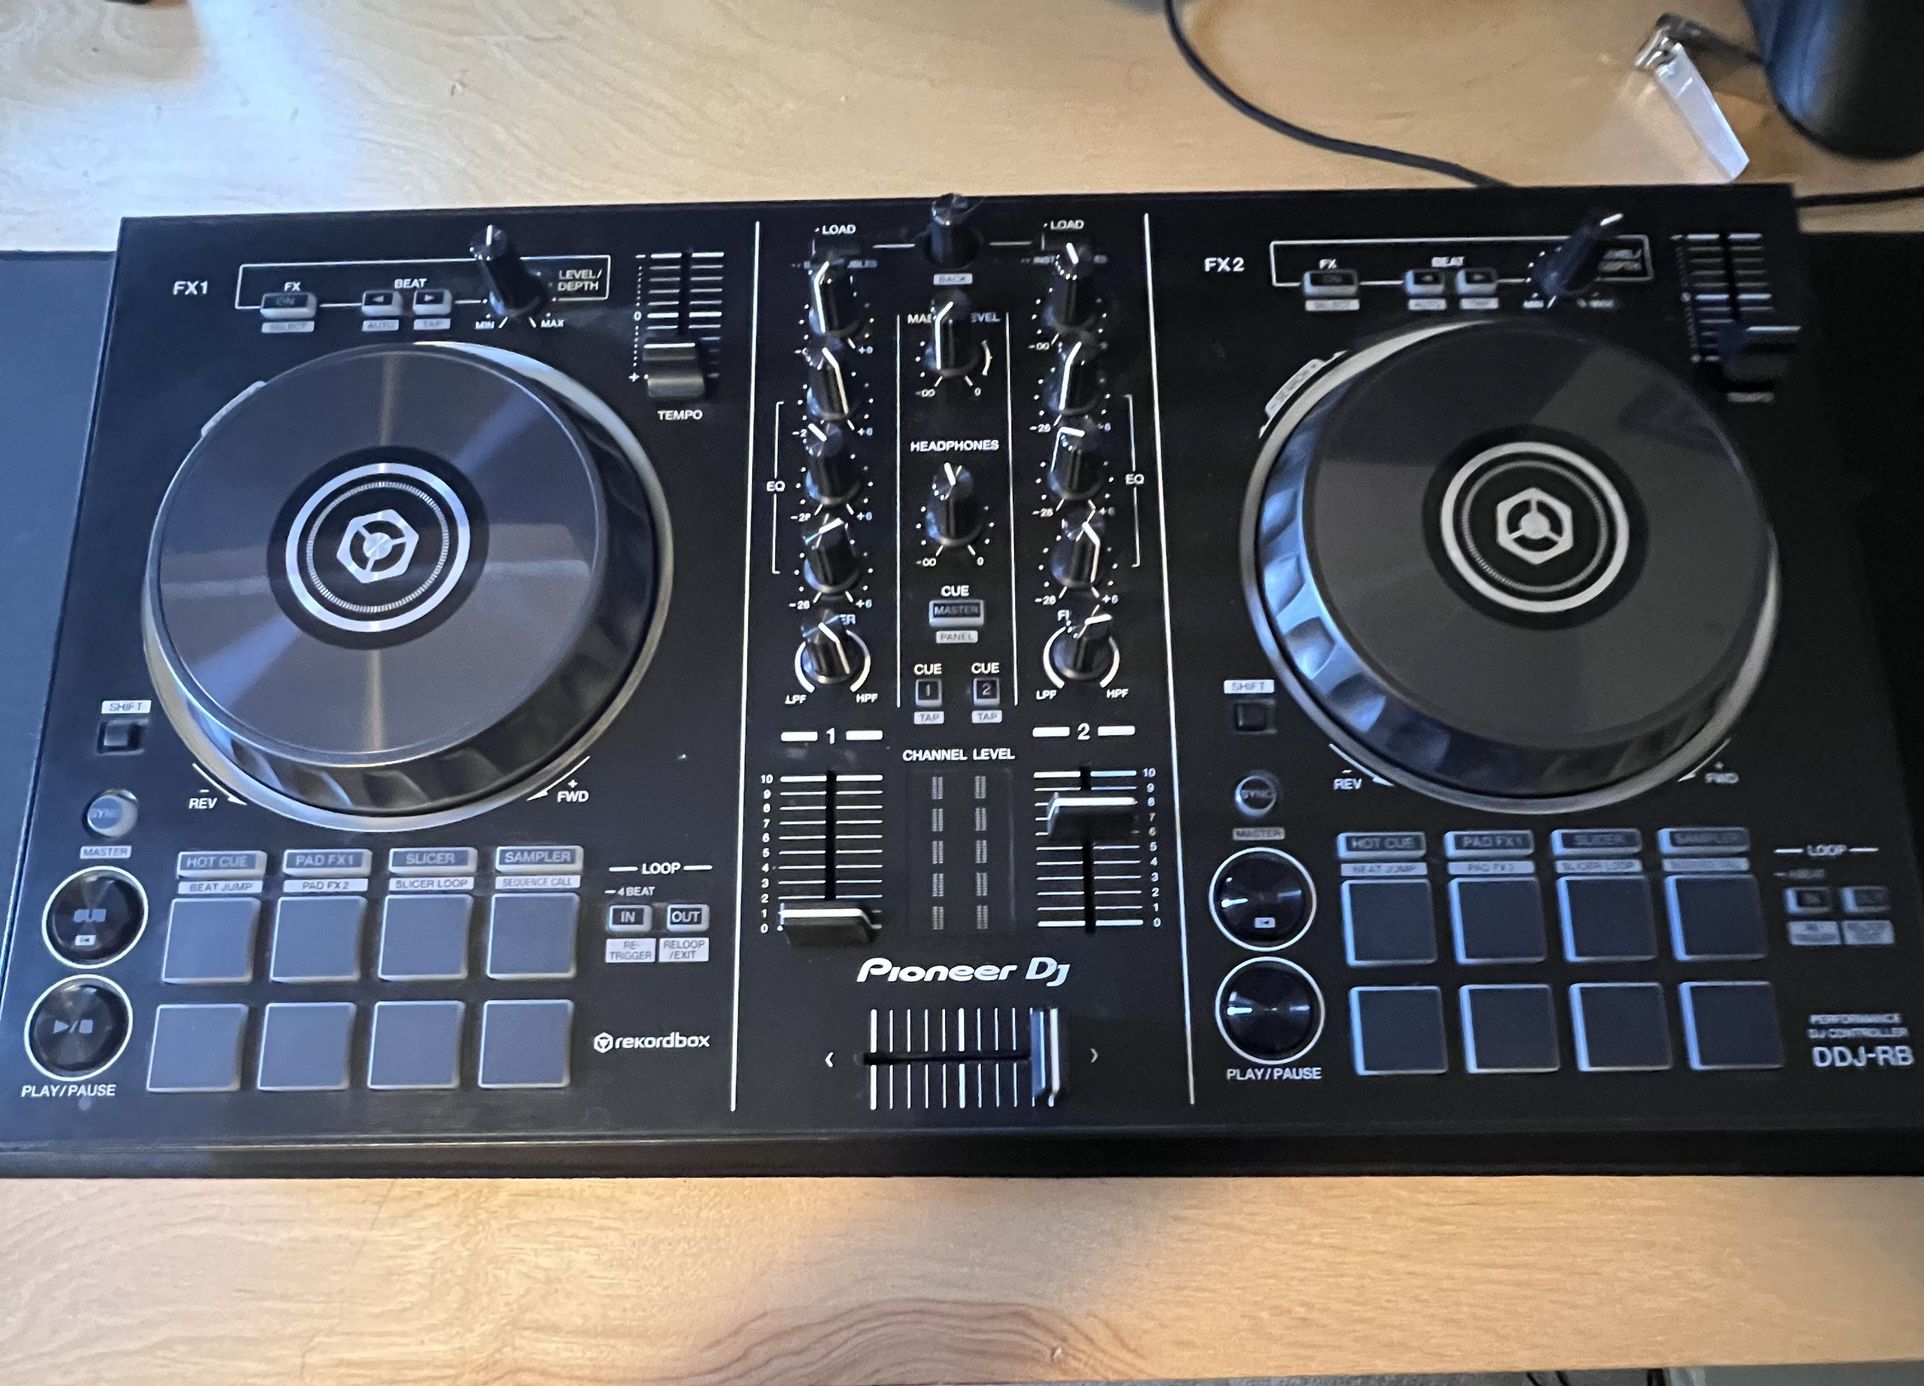 Pioneer DDJ-RB + Serial Key for Sale in Issaquah, WA - OfferUp